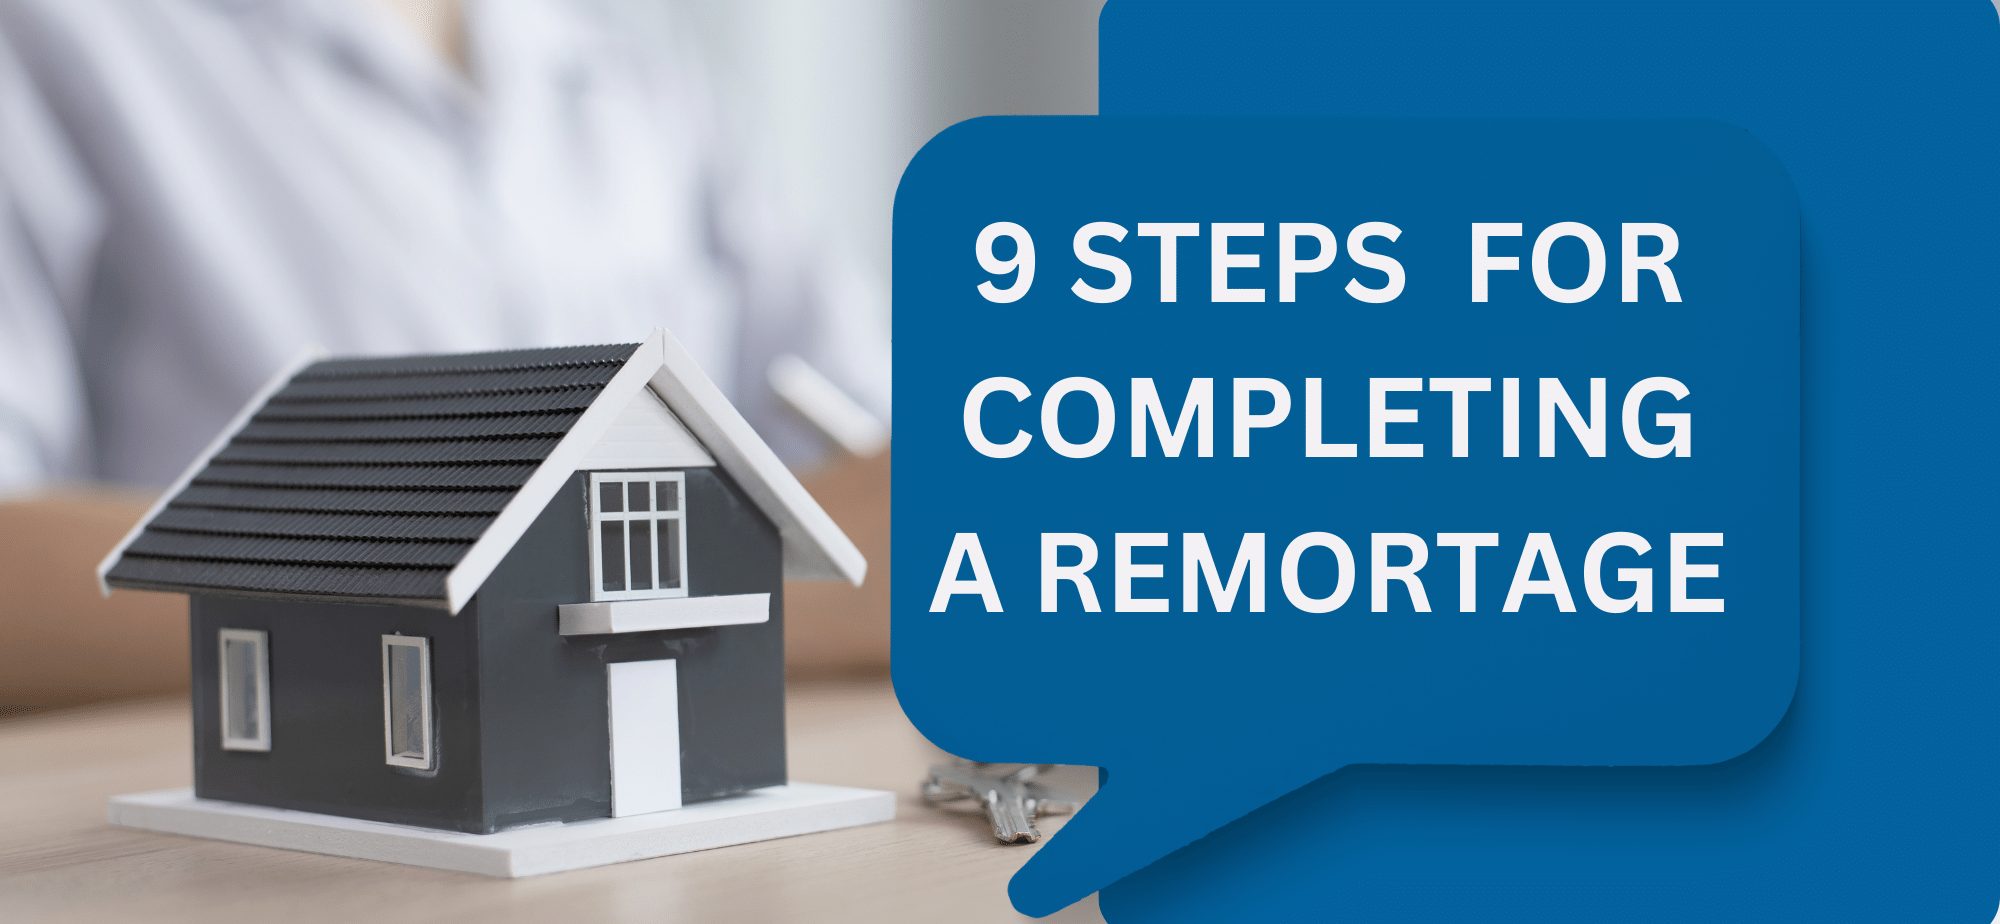 9 steps for completing a remortgage